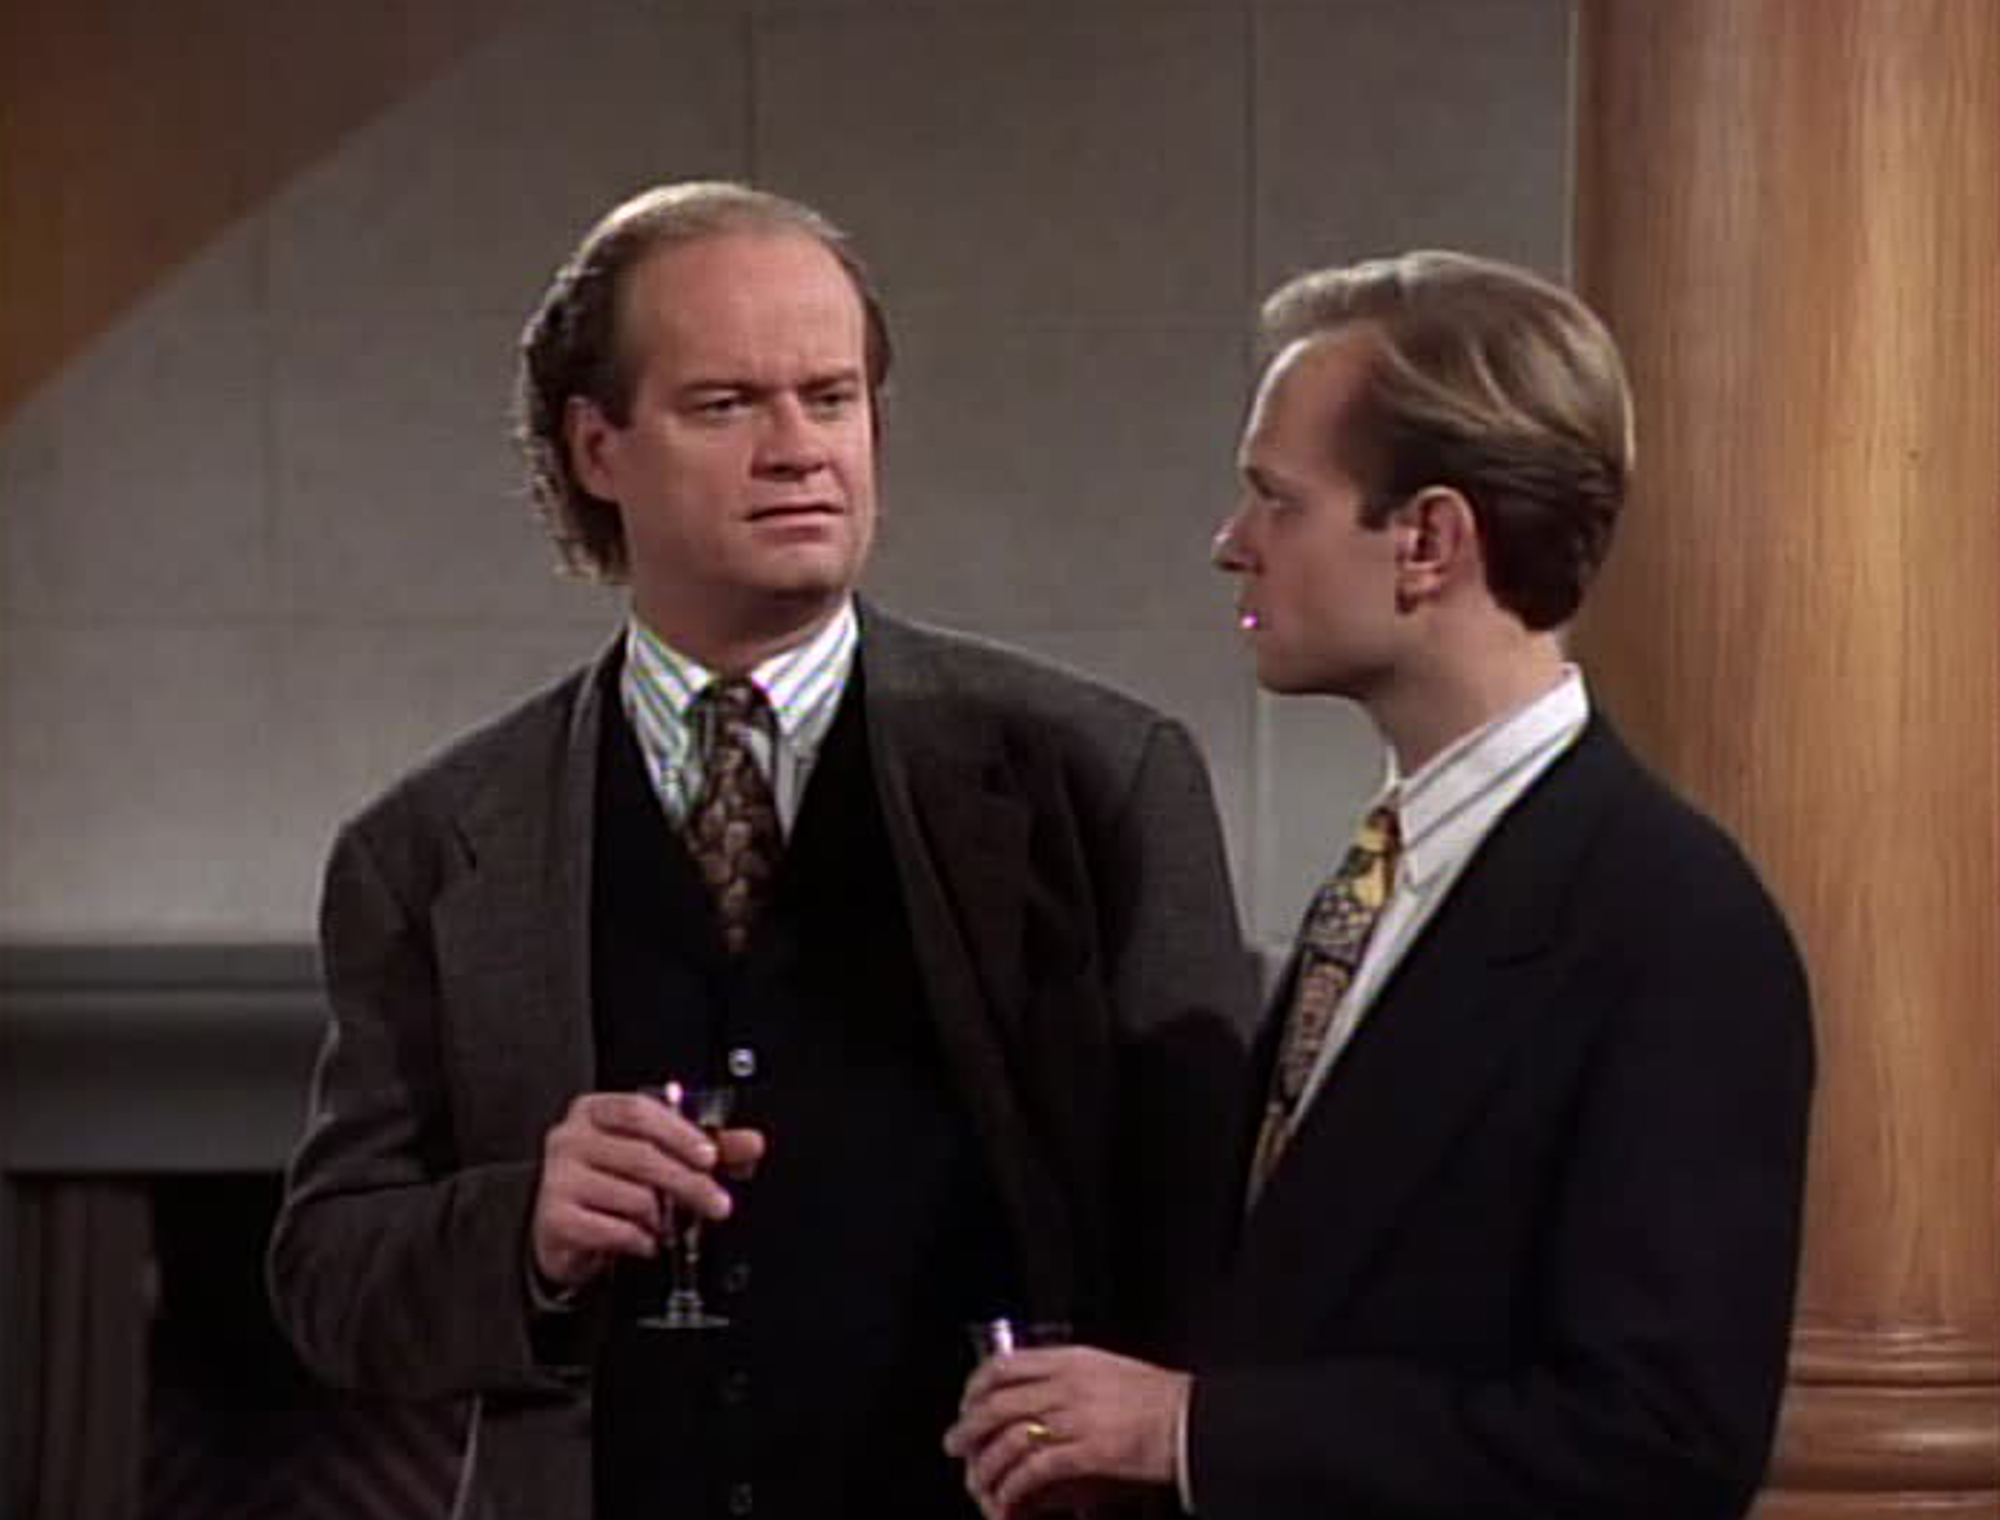 Dr. Frasier Crane and his brother, Dr. Niles Crane stand in Frasier's apartment